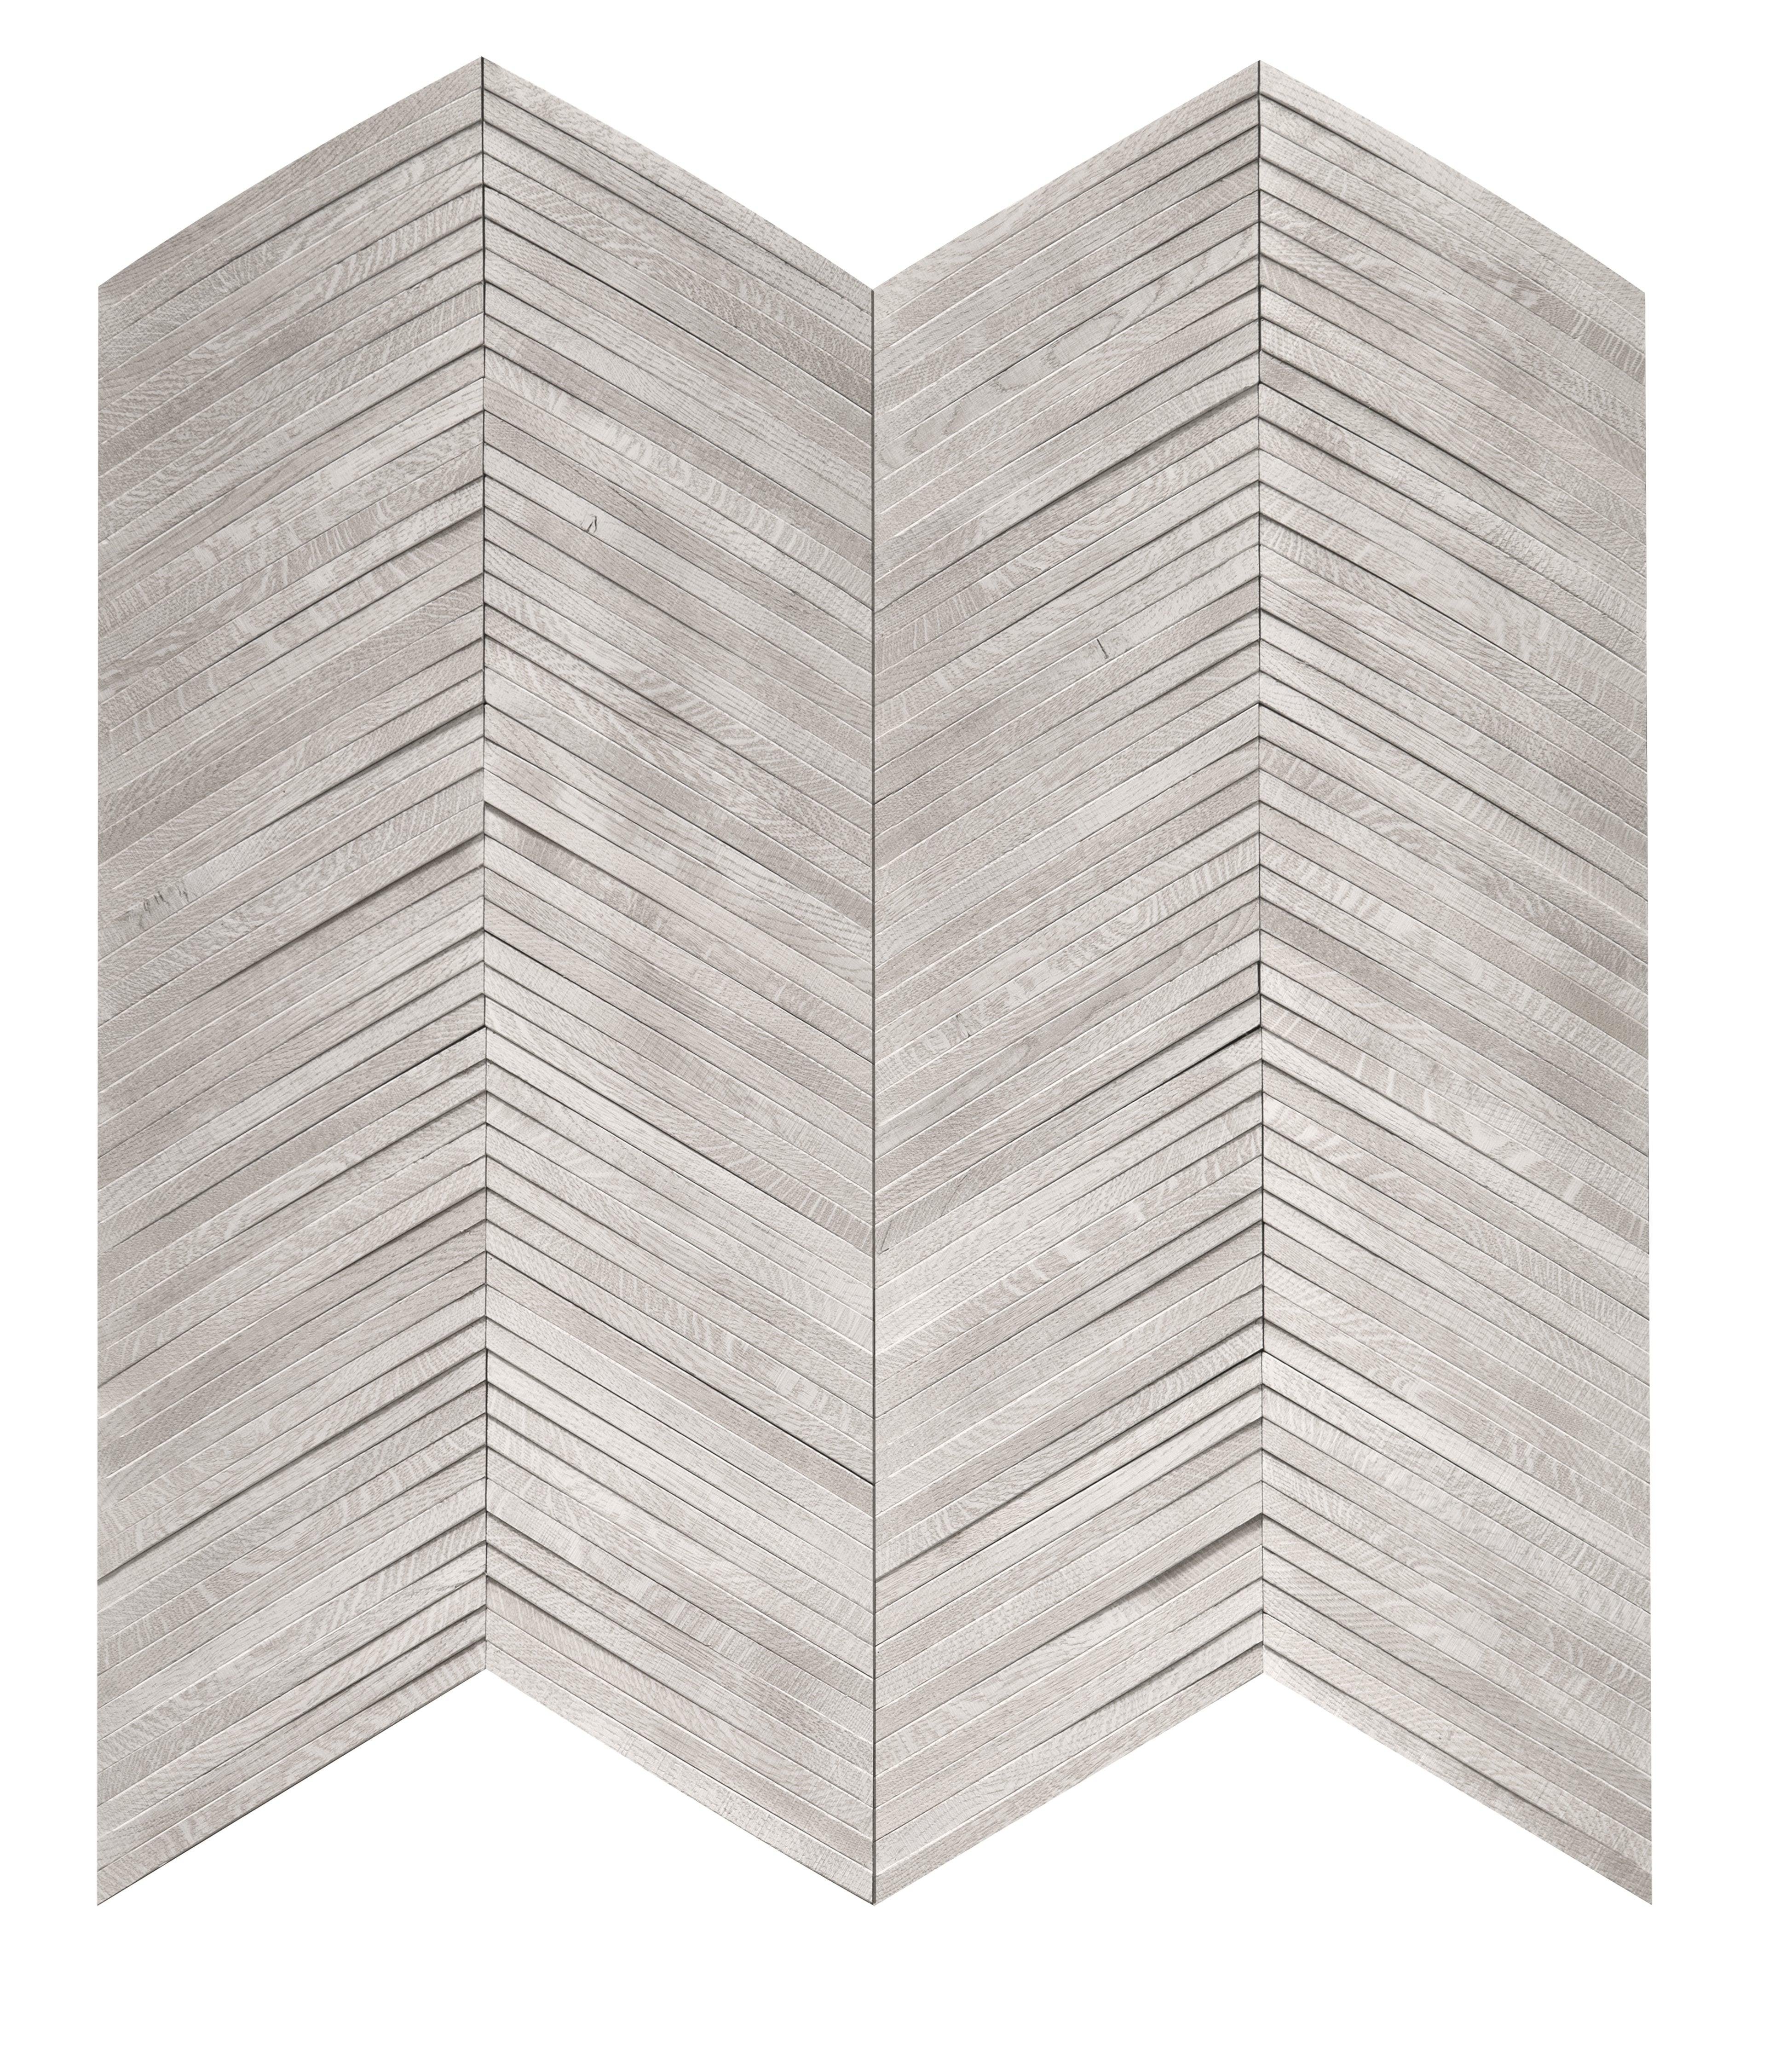 duchateau inceptiv ark chevron iceberg oak three dimensional wall natural wood panel lacquer for interior use distributed by surface group international